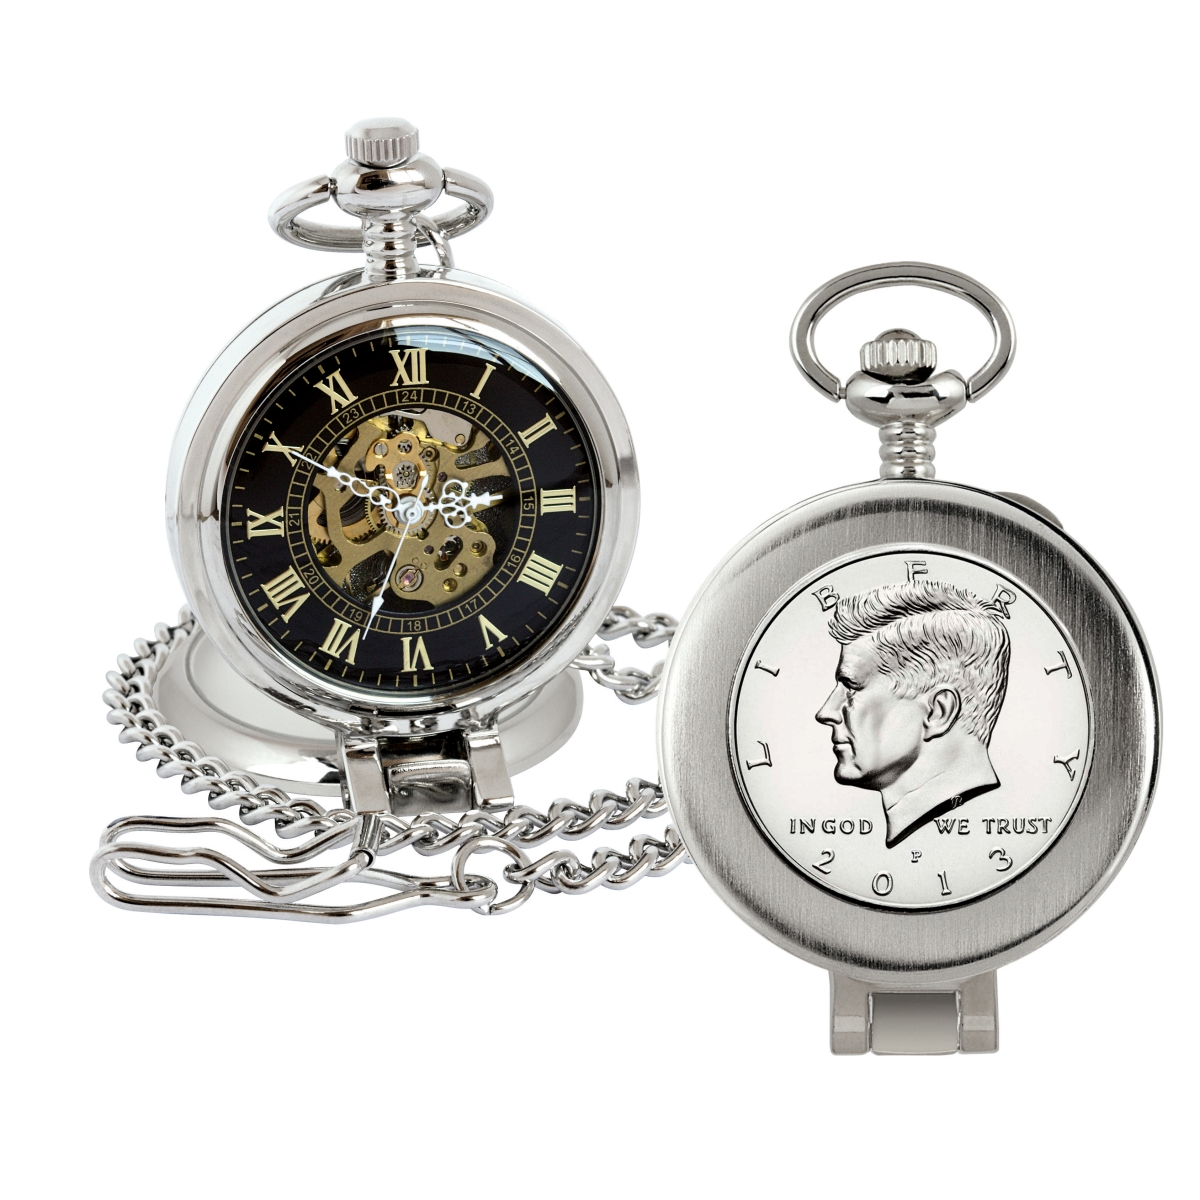 Picture of American Coin Treasures 16268 Proof JFK Half Dollar Coin Pocket Watch with Skeleton Movement, Black Dial with Gold Roman Numerals - Magnifying Glass